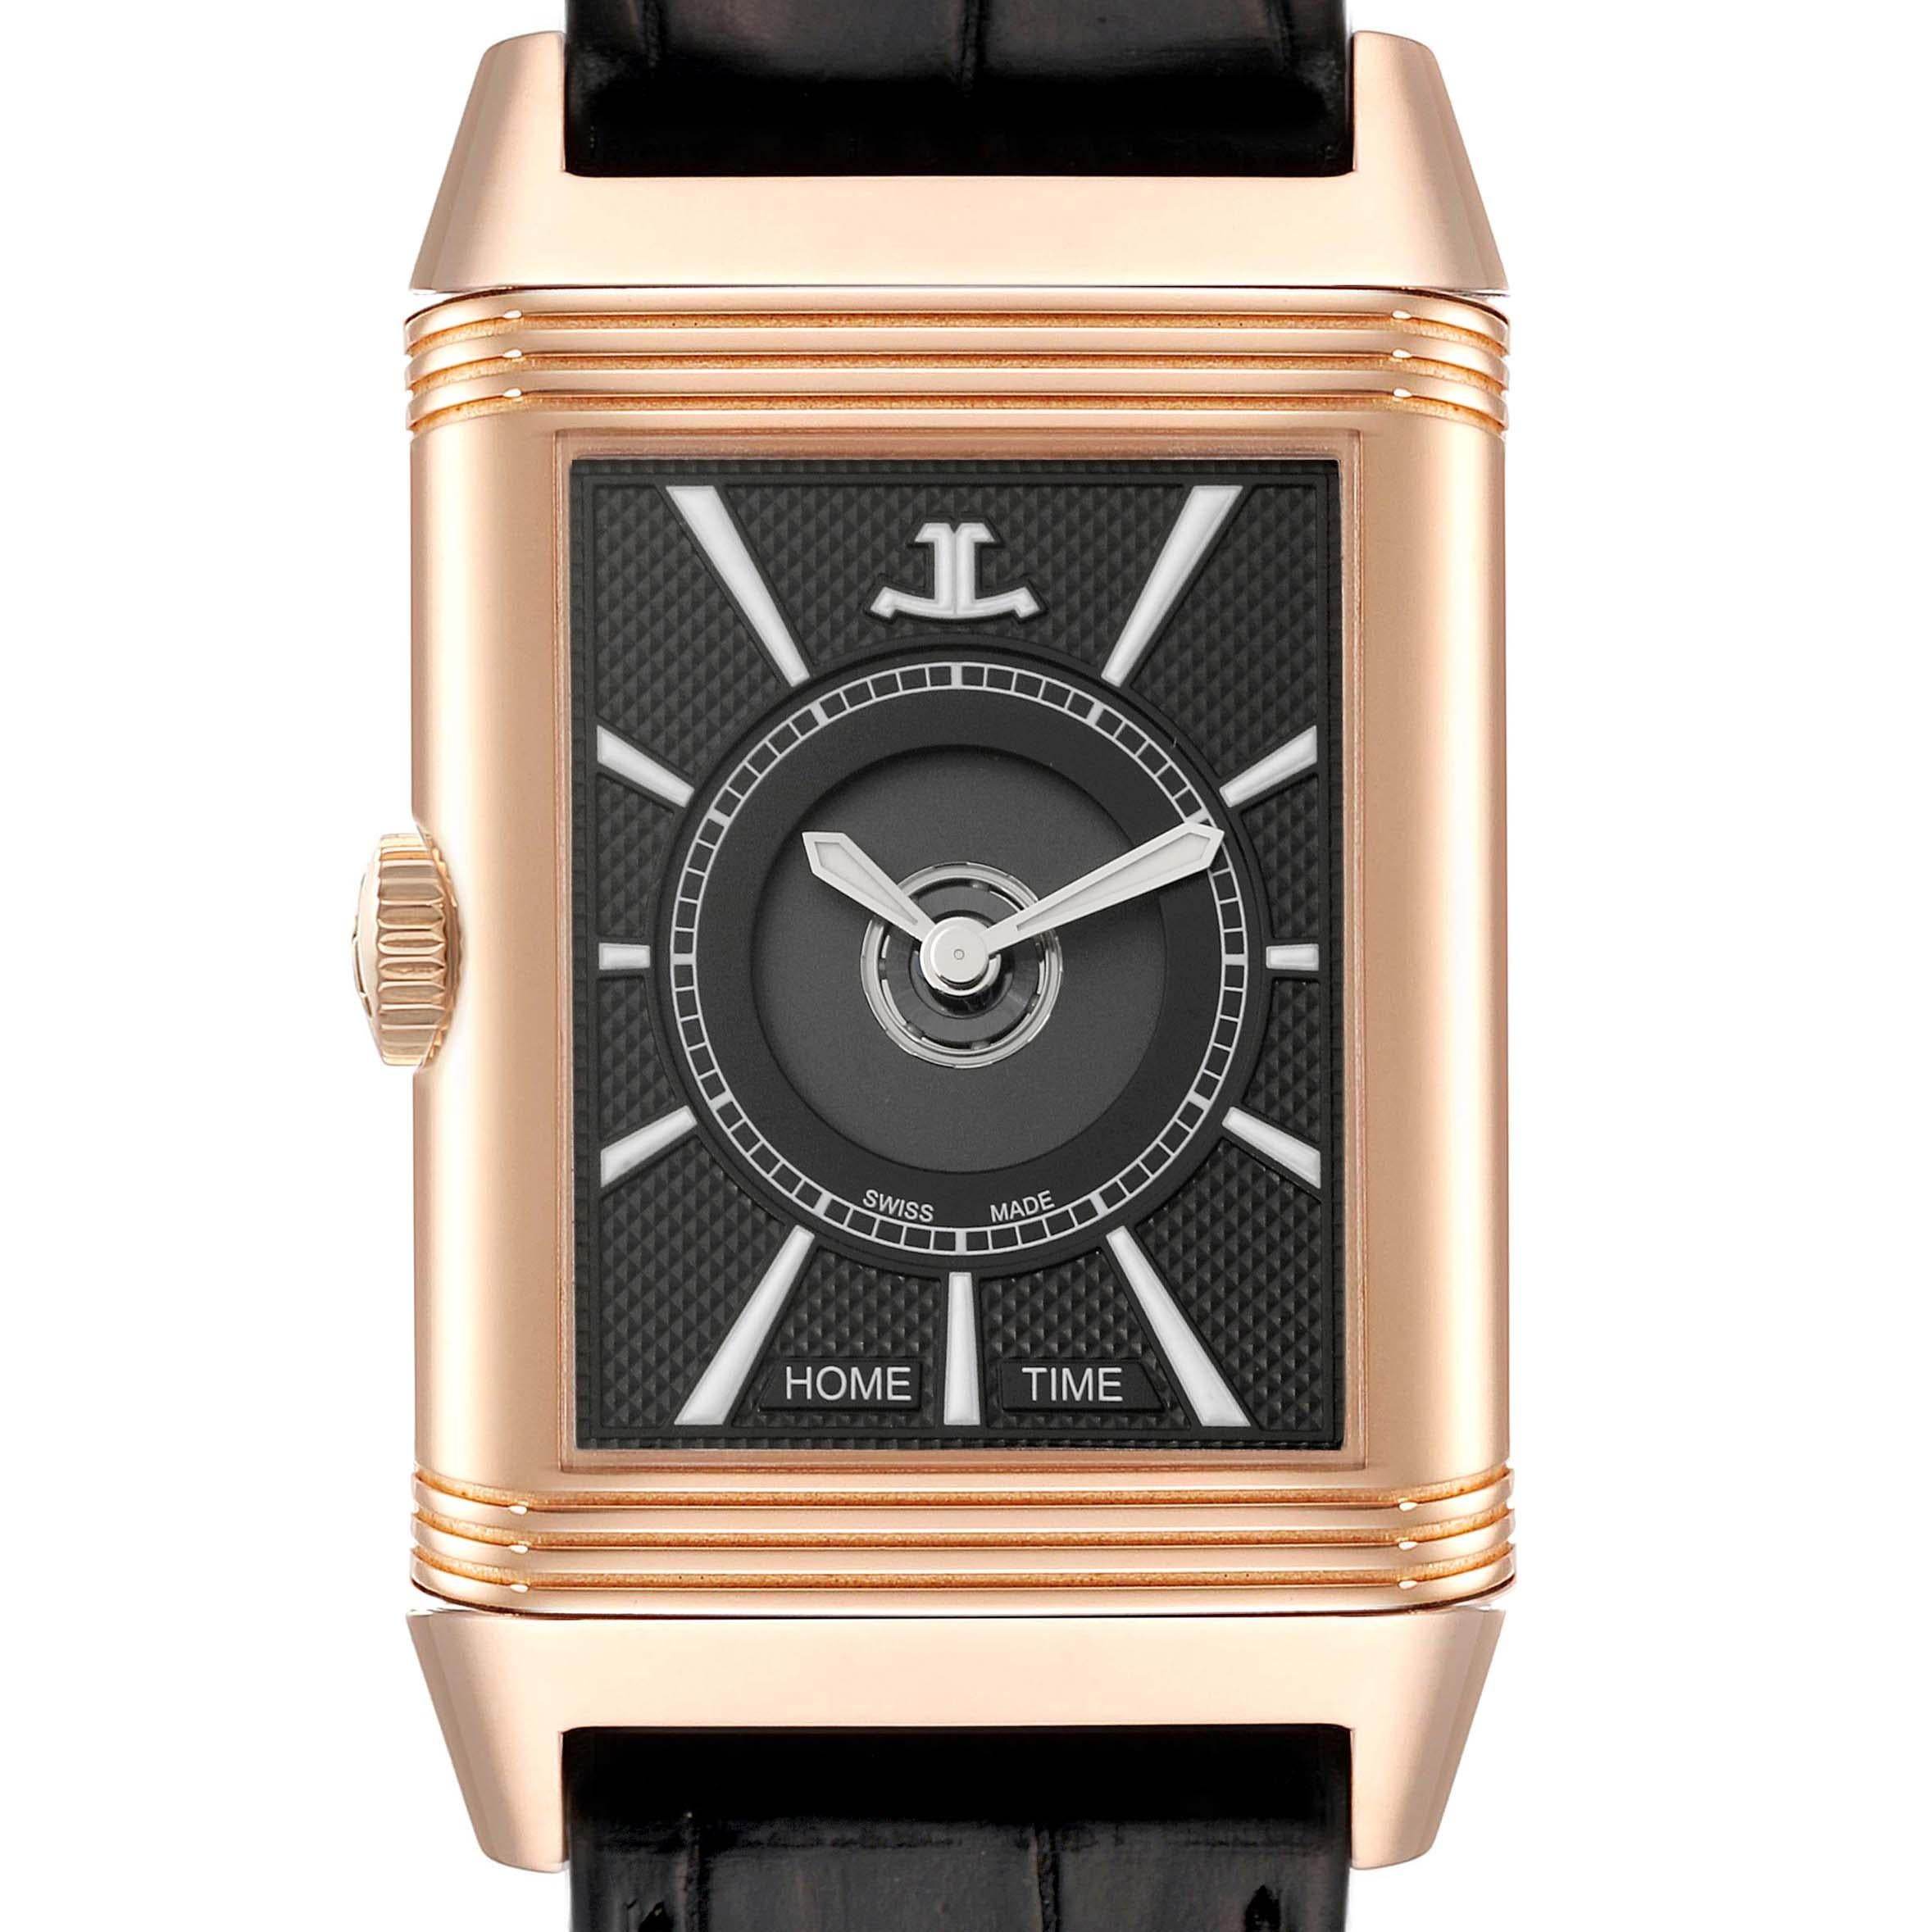 Jaeger LeCoultre Reverso Duoface Rose Gold Mens Watch 215.2.S9 Q3832420 Card. Automatic self-winding movement with dual time function. 18k rose gold 47 mm x 28.3 mm rectangular rotating case. 18k rose gold reeded bezel. Scratch resistant sapphire